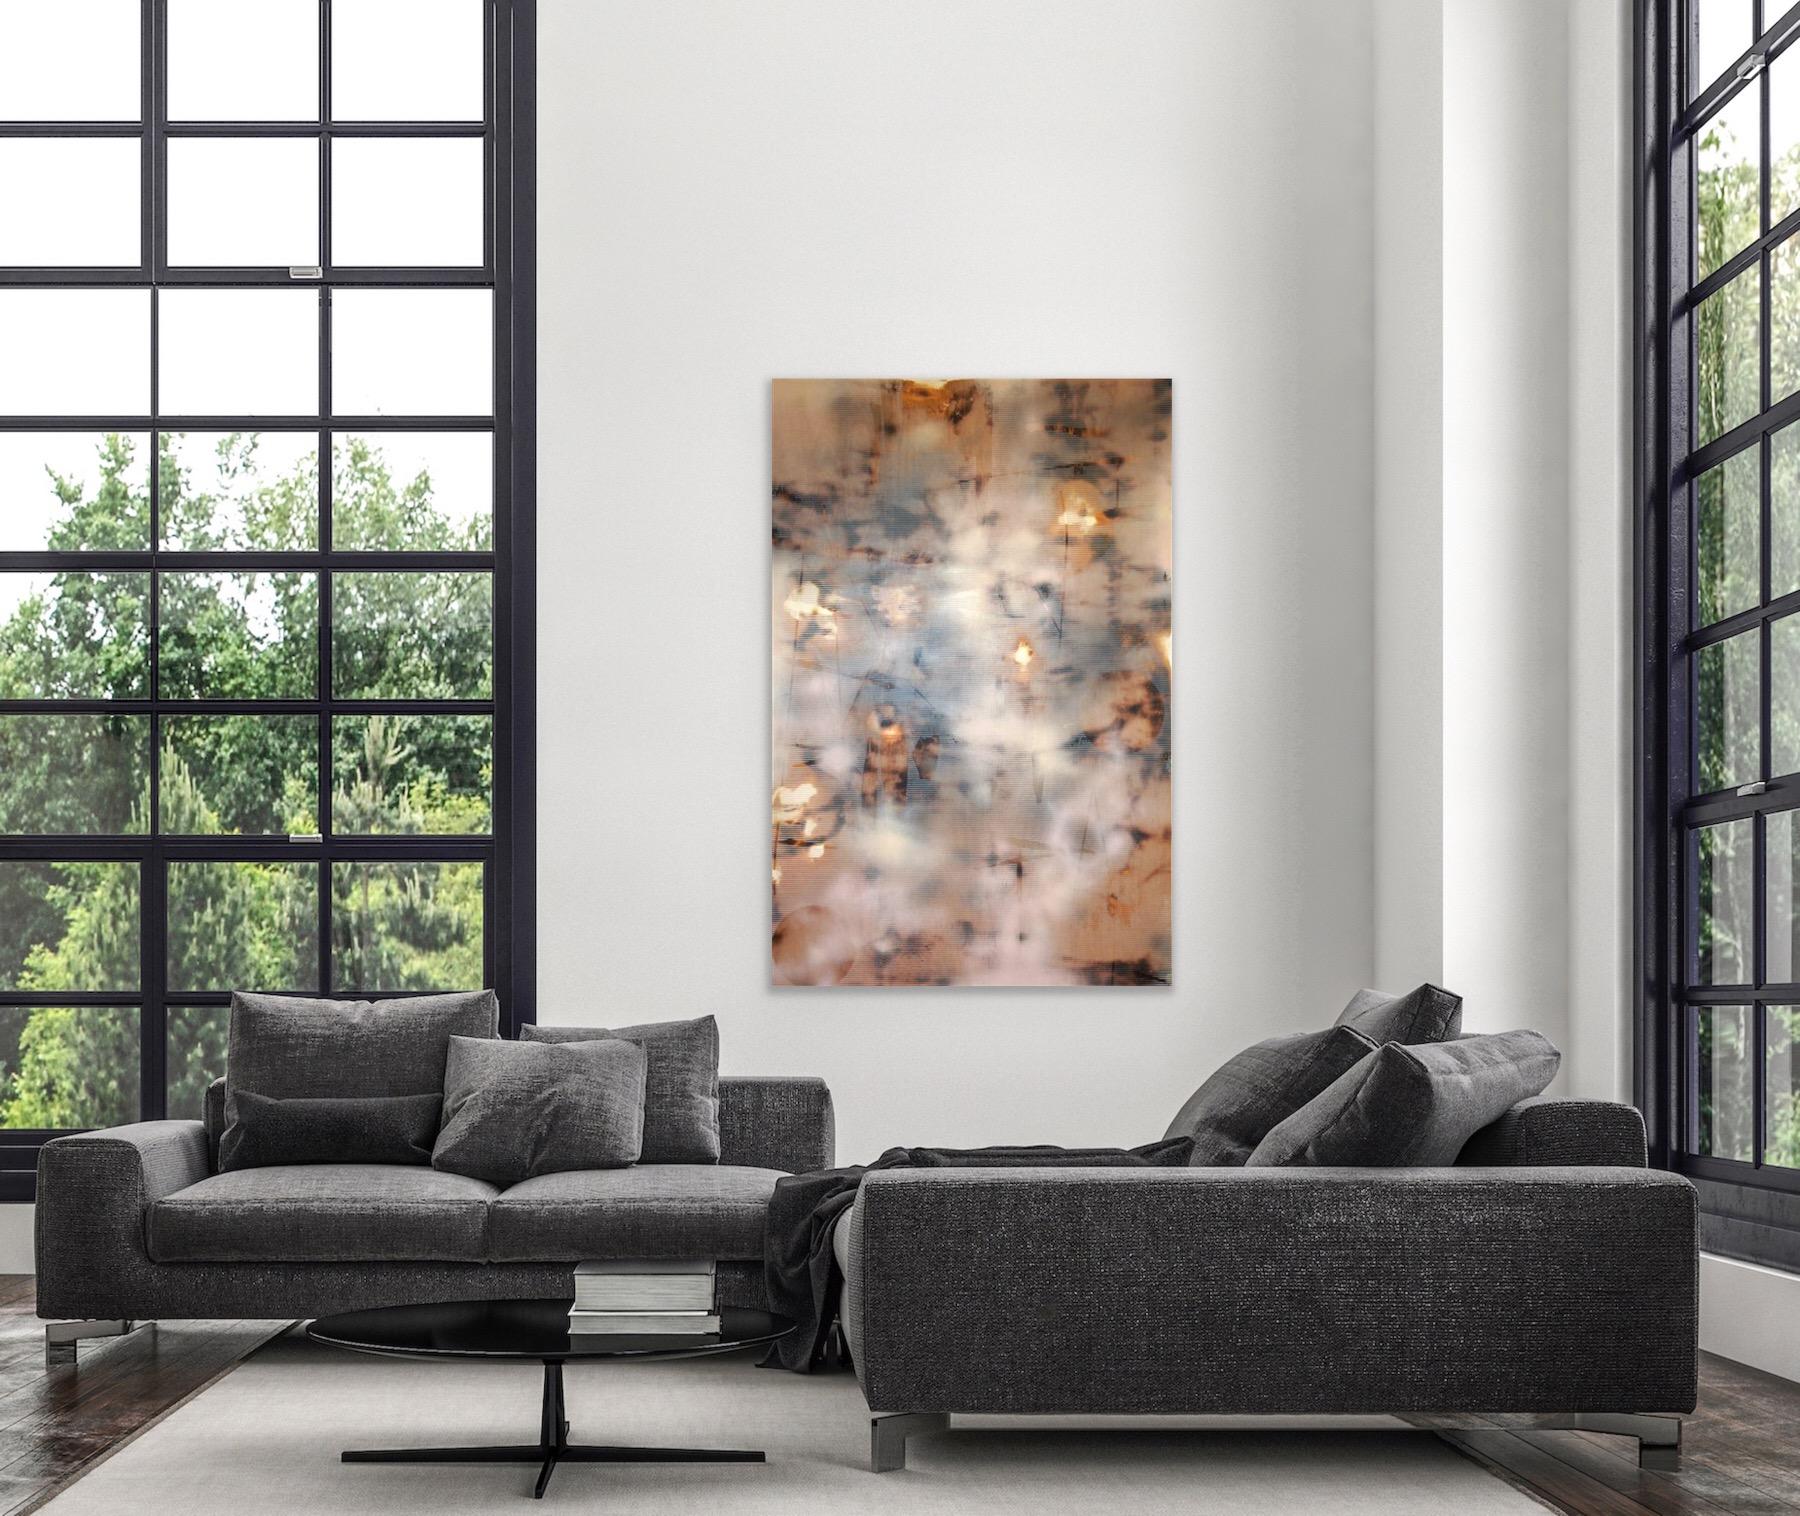 Turbulence 7 (grid painting abstract wood contemporary neutral large scale zen 2